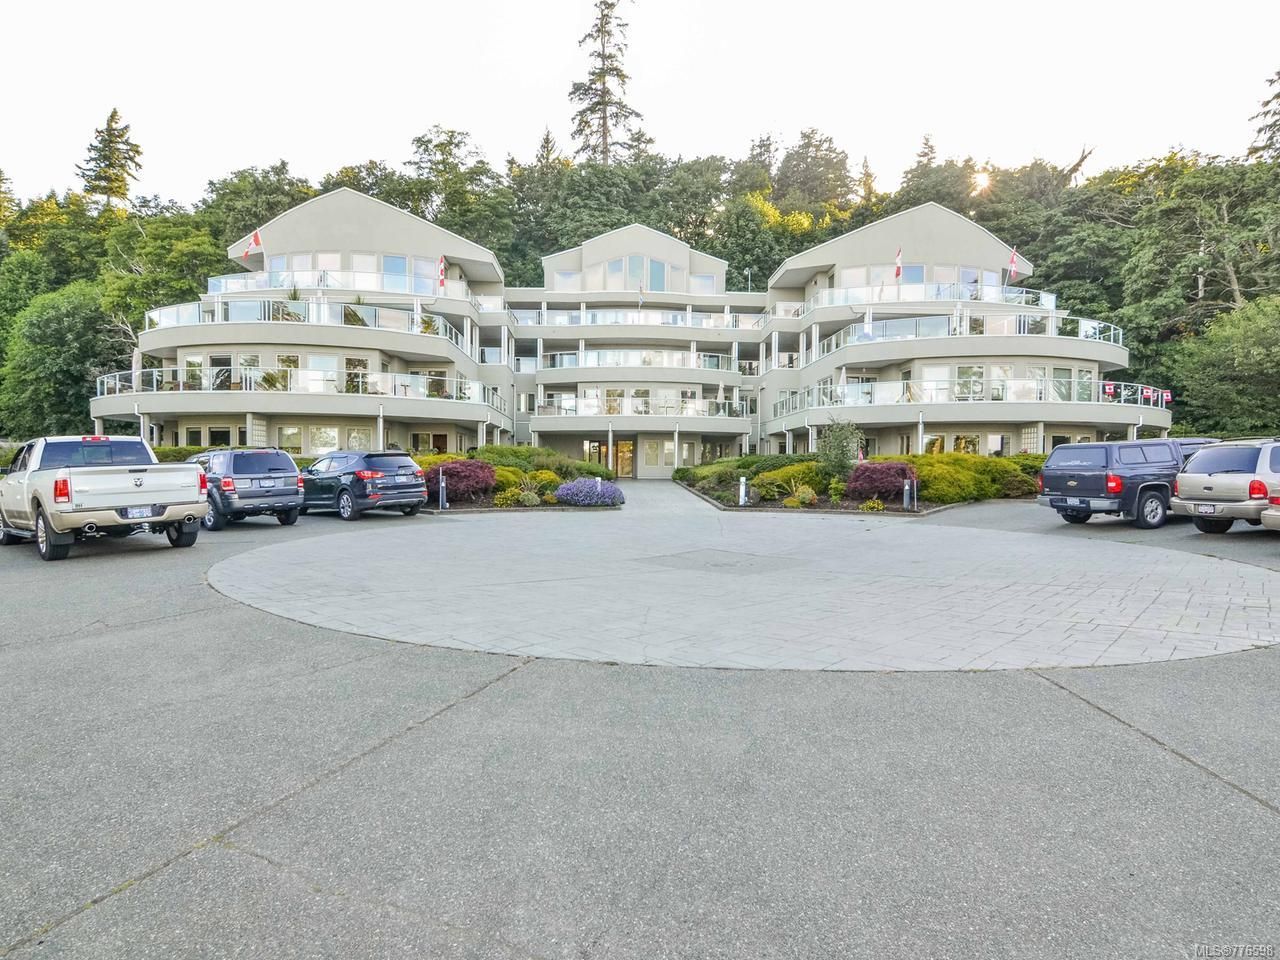 Main Photo: 402 700 S ISLAND S Highway in CAMPBELL RIVER: CR Campbell River Central Condo for sale (Campbell River)  : MLS®# 776598